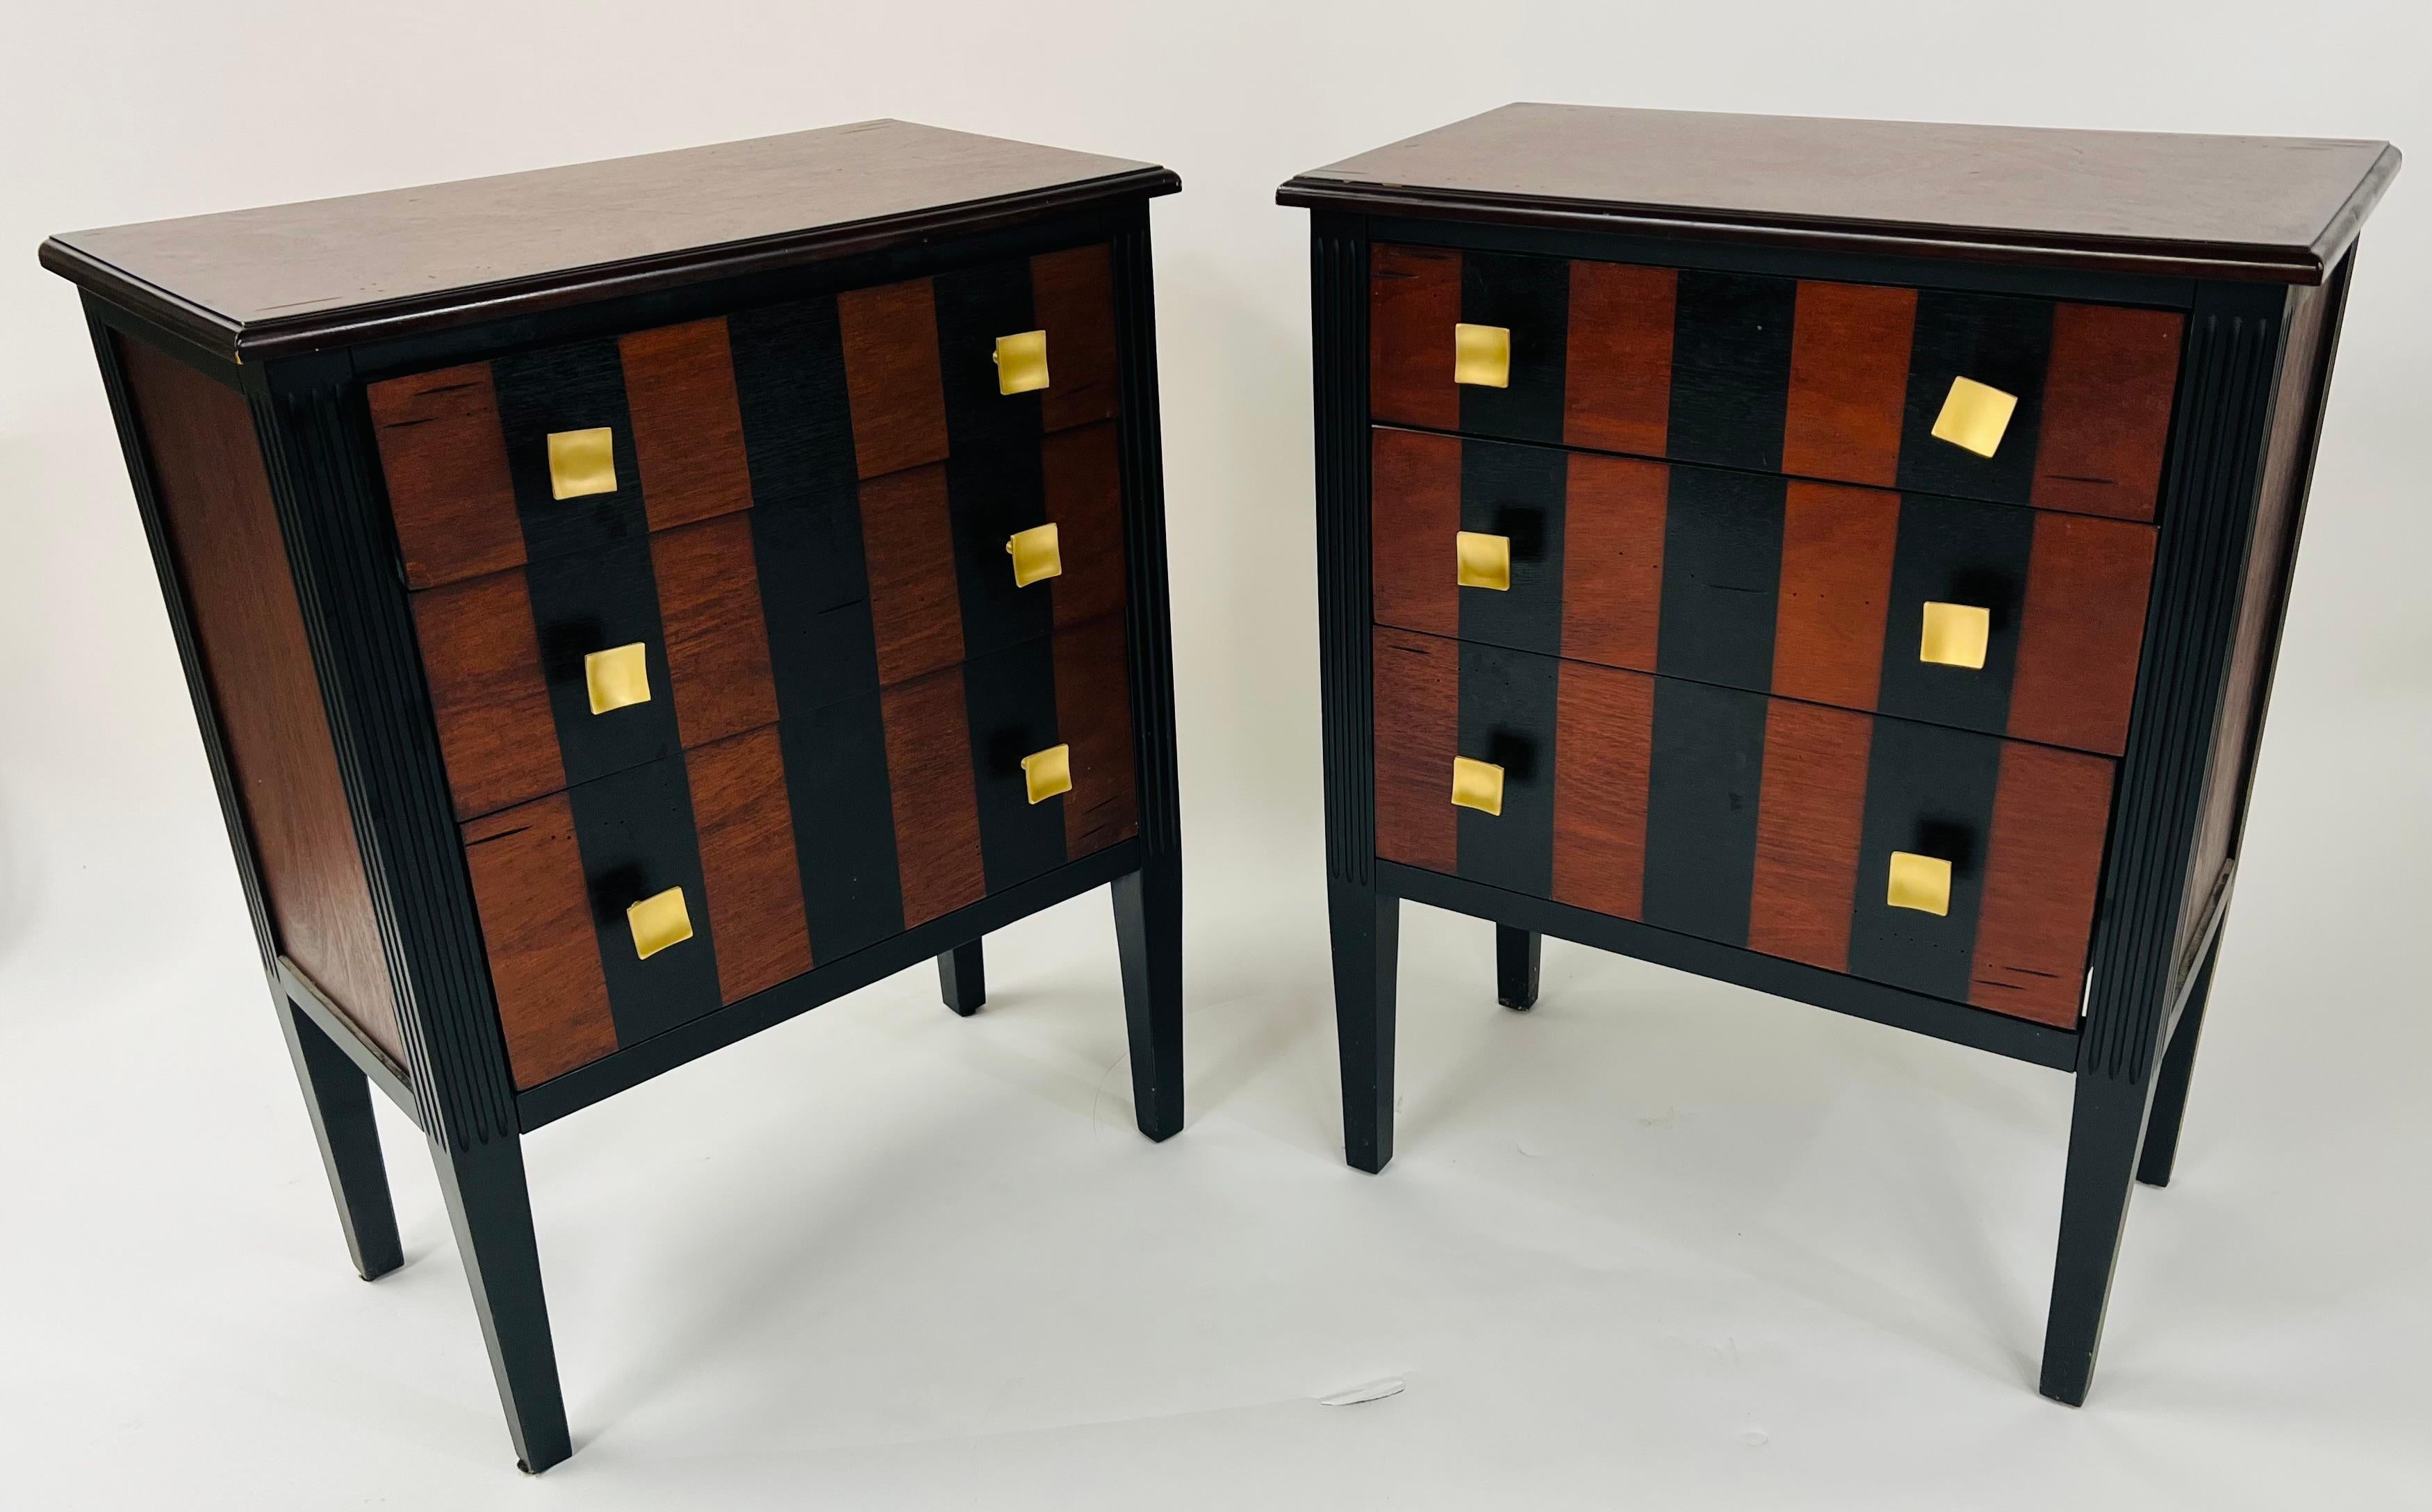 An elegant pair of Art Deco style nightstands, end or side tables made of Rosewood. The pair of nightstands are decorated with strip patterns painted in black and square brass pulls reminiscent of the Art Deco design and shapes. The rosewood natural